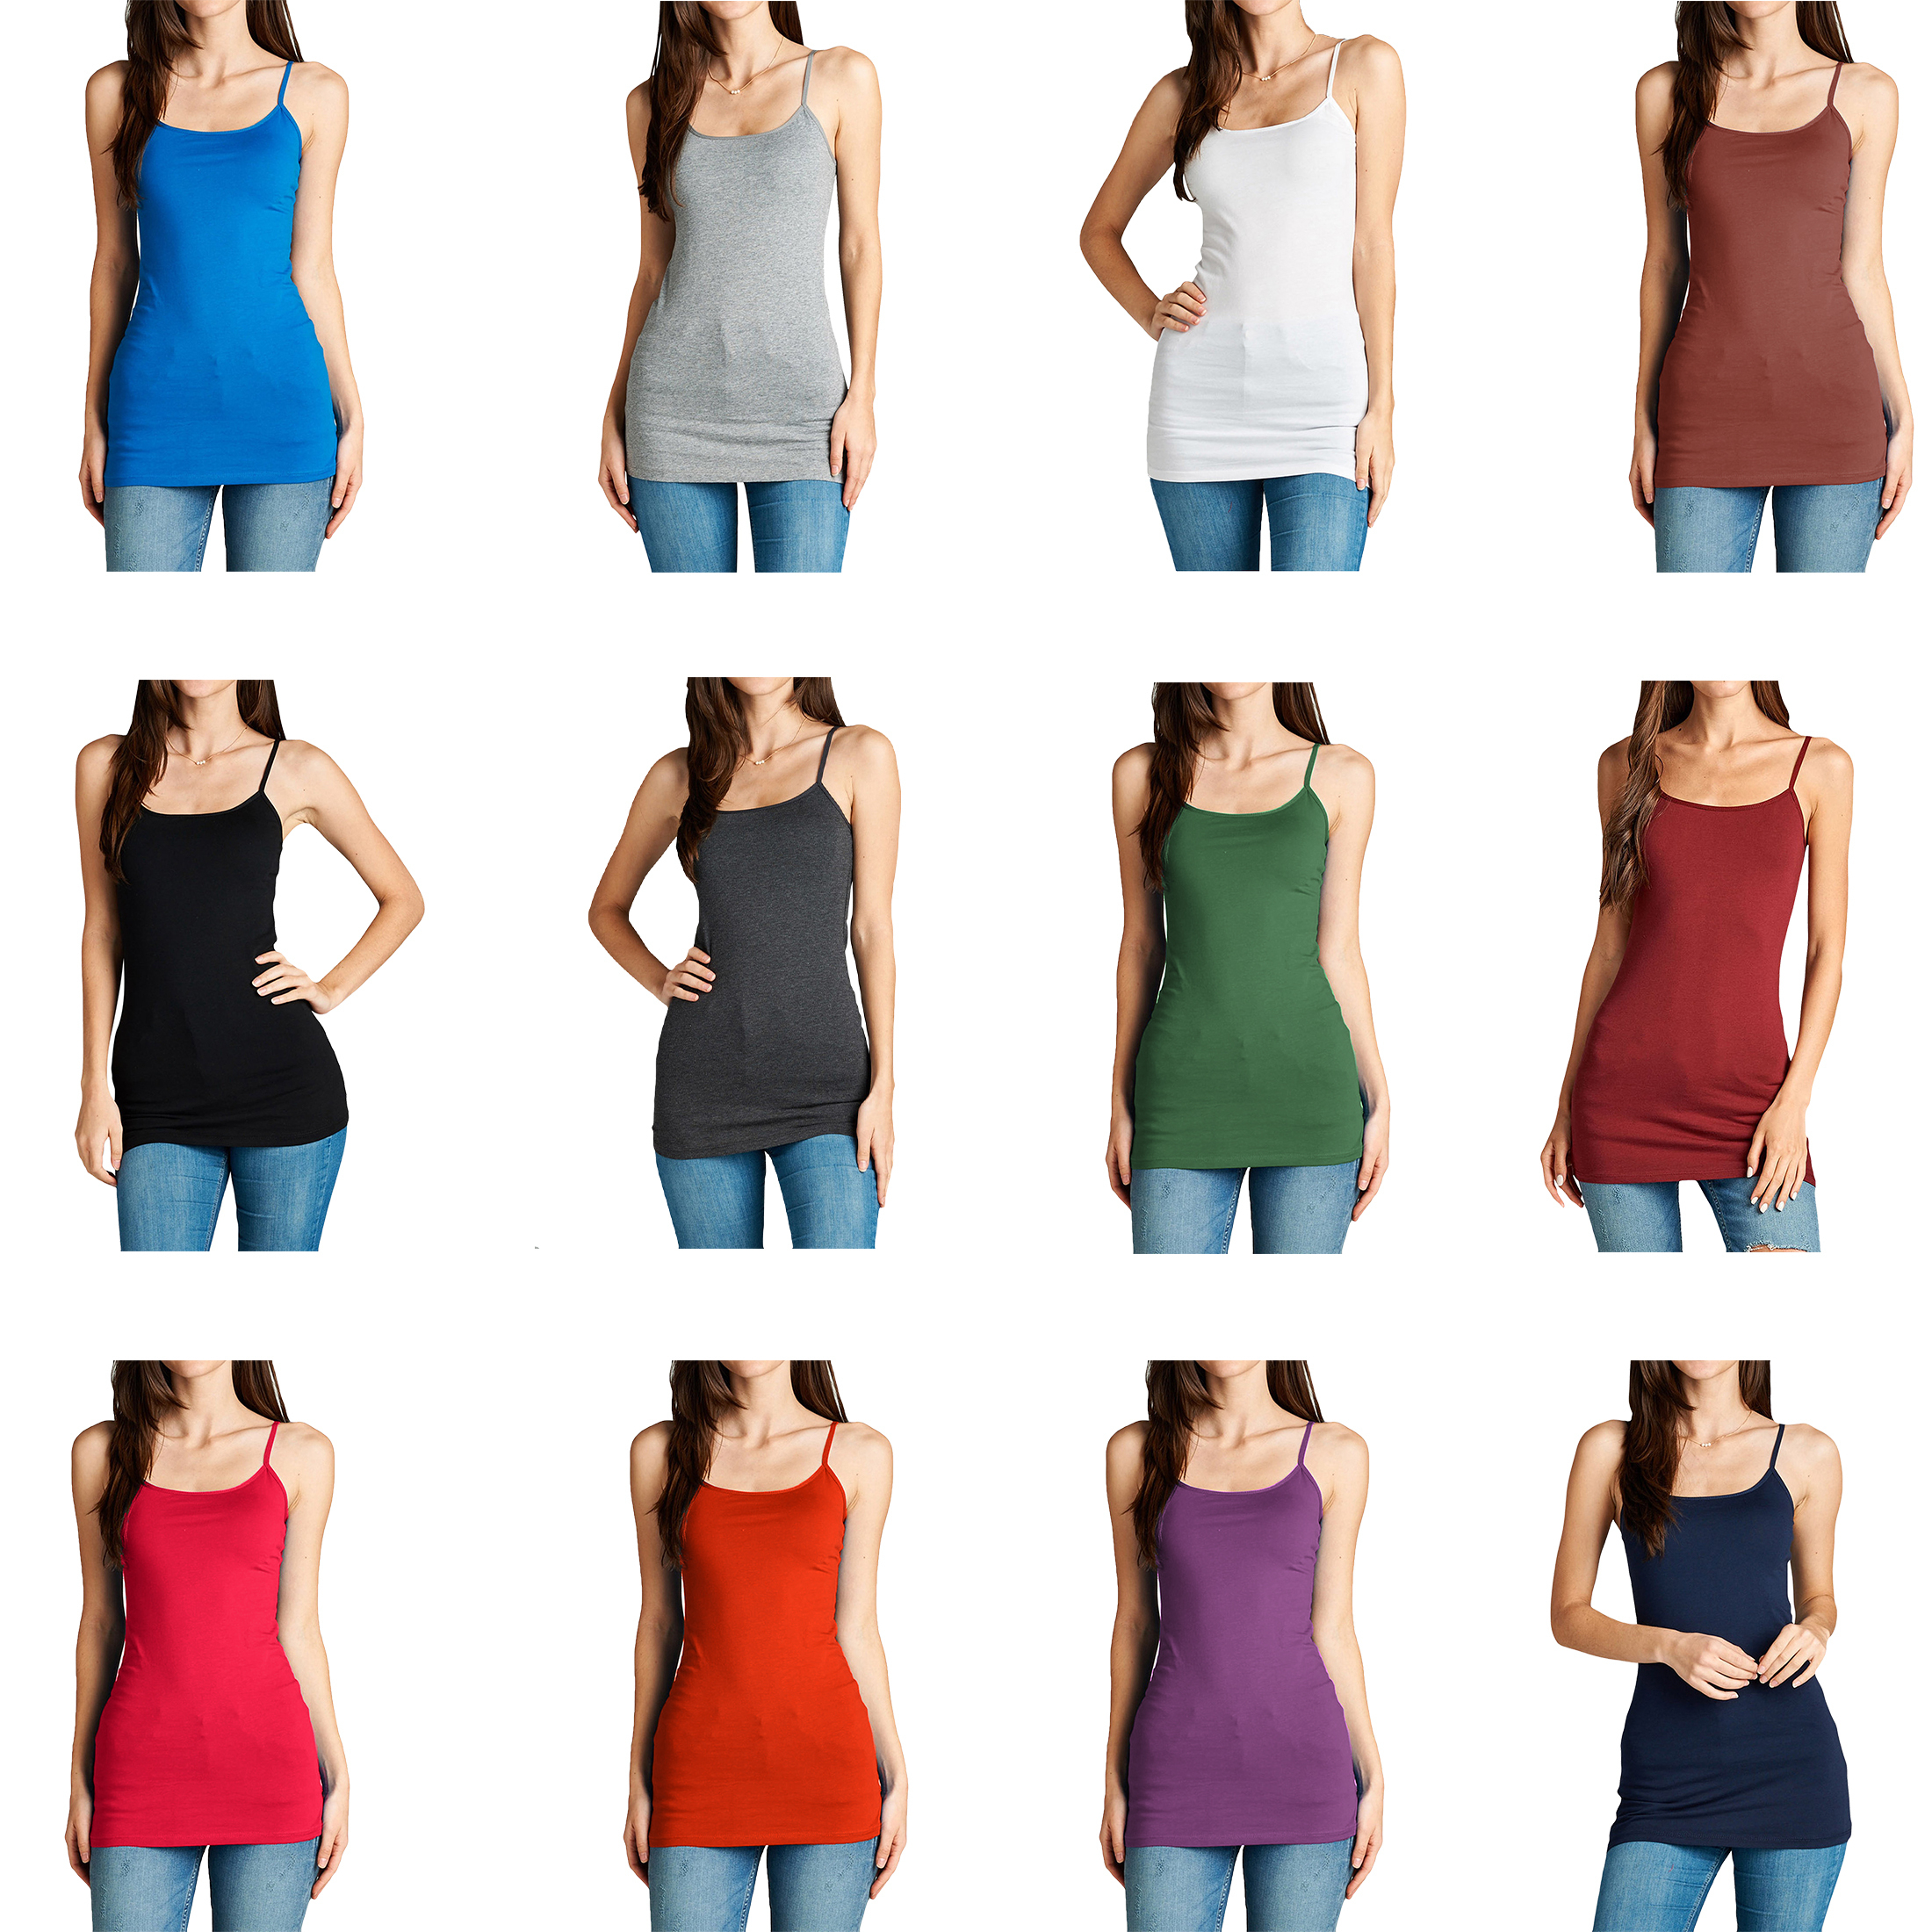 6-Pack Women's Sleeveless Athletic Tank Tops Soft Classic Relaxed-Fit Lightweight Ladies Tank Tees - M